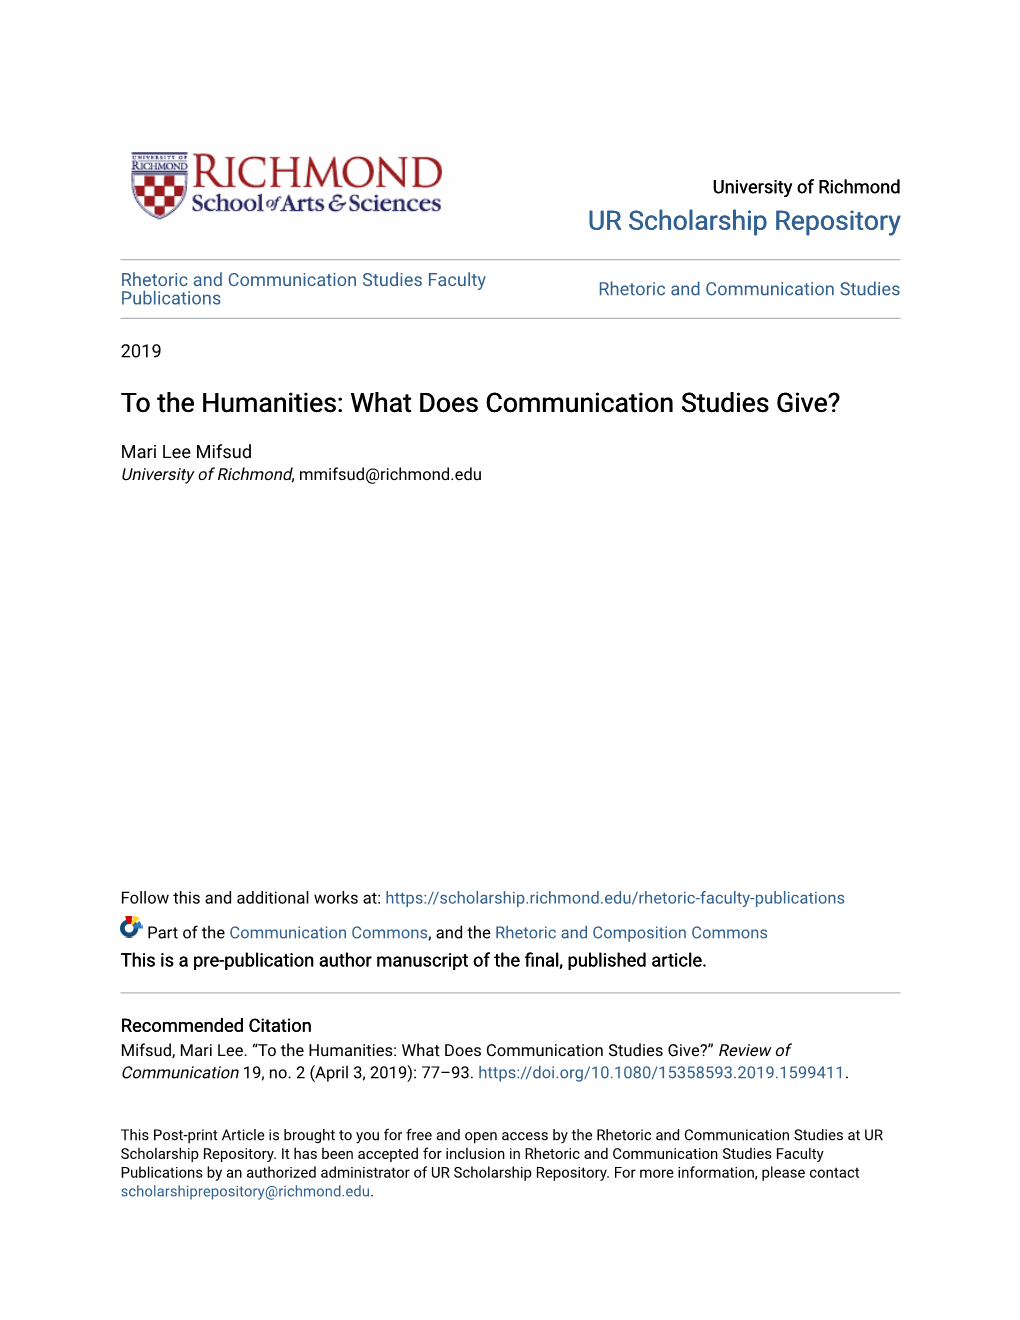 What Does Communication Studies Give?